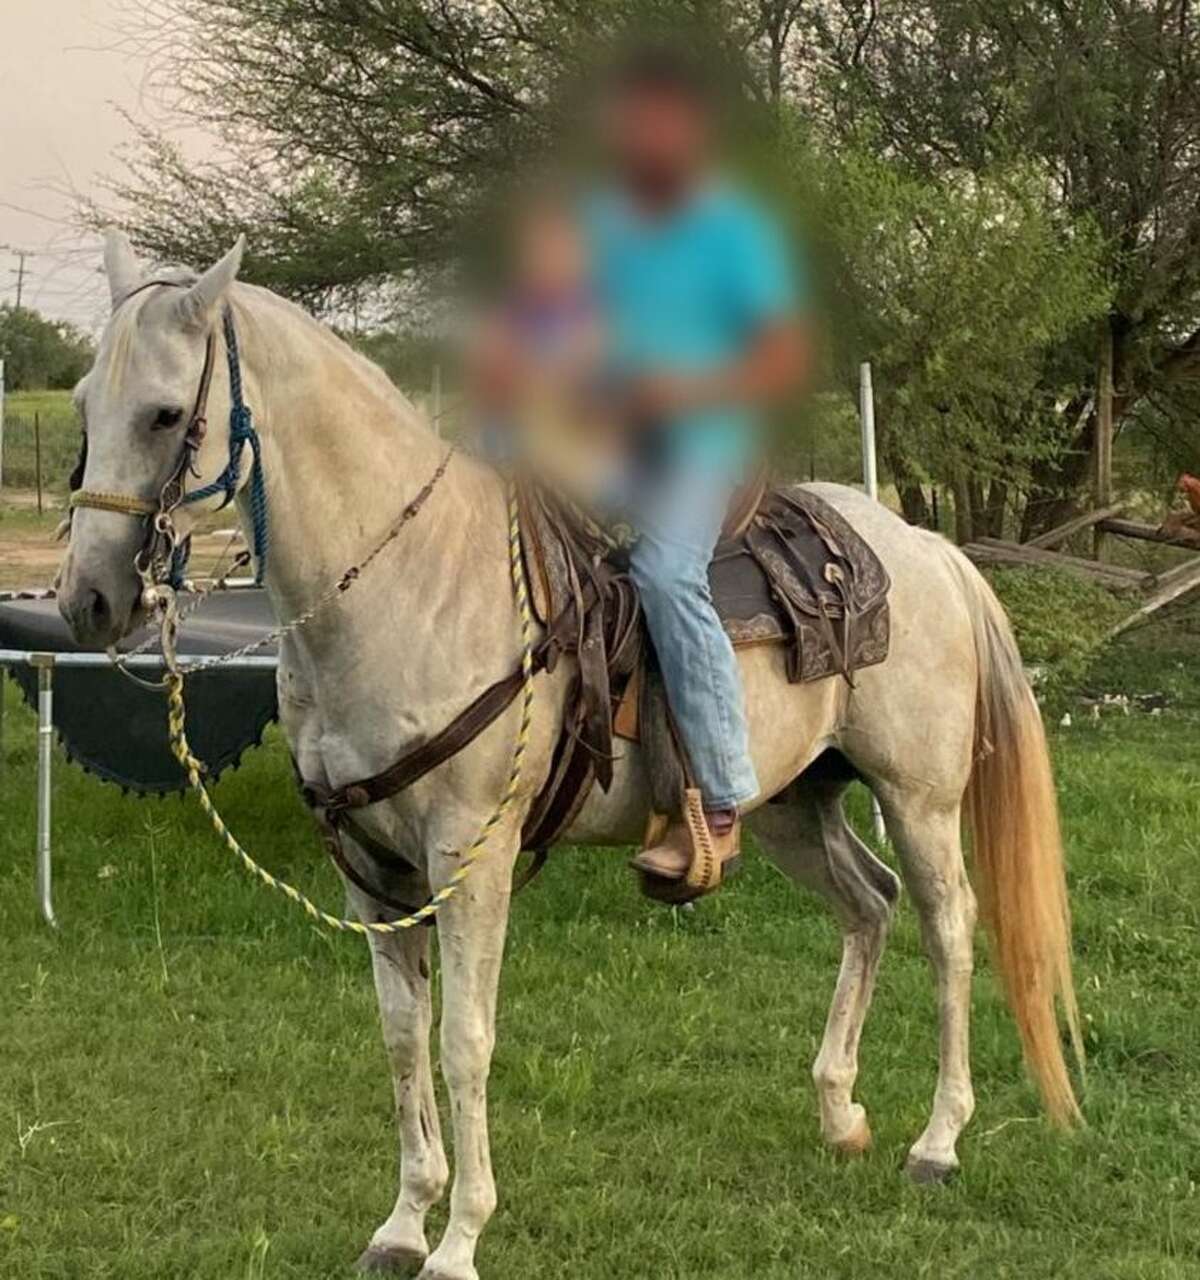 Investigators with the Bexar County Sheriff’s Office are looking for the person or persons responsible for shooting and killing Conejo, the horse, in the southeastern portion of the county in January. 